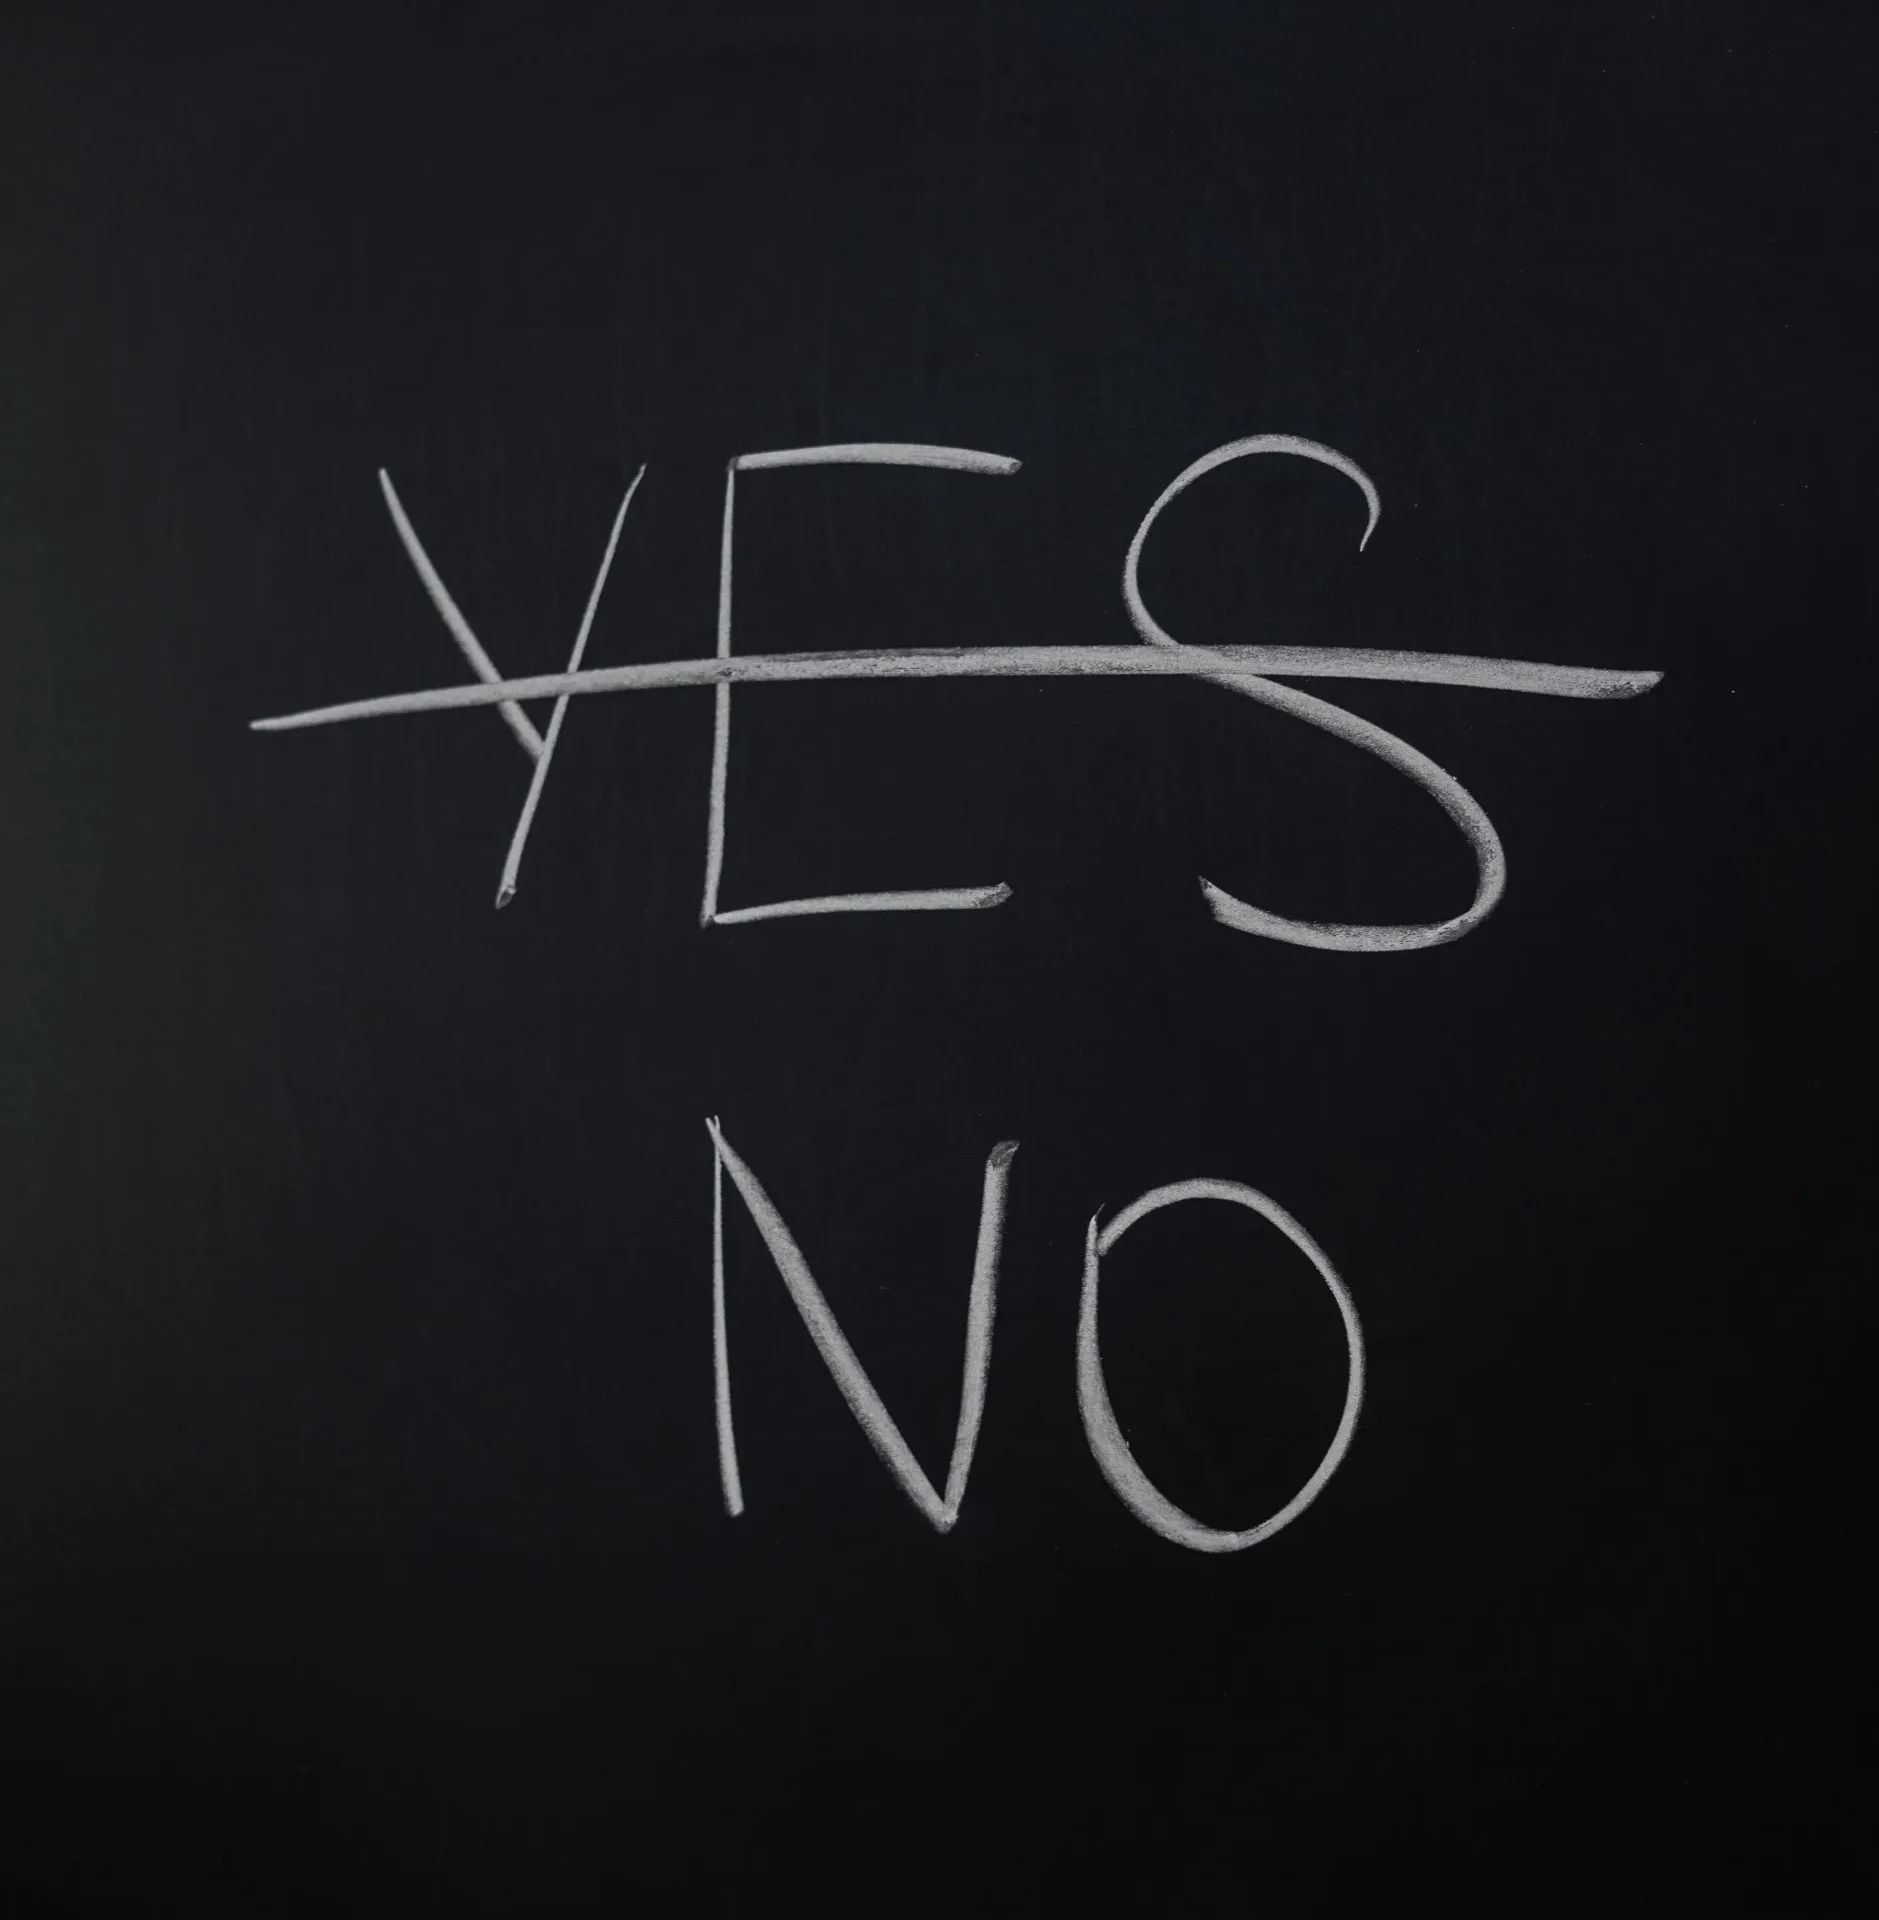 Yes and no on blackboard. Yes crossed out